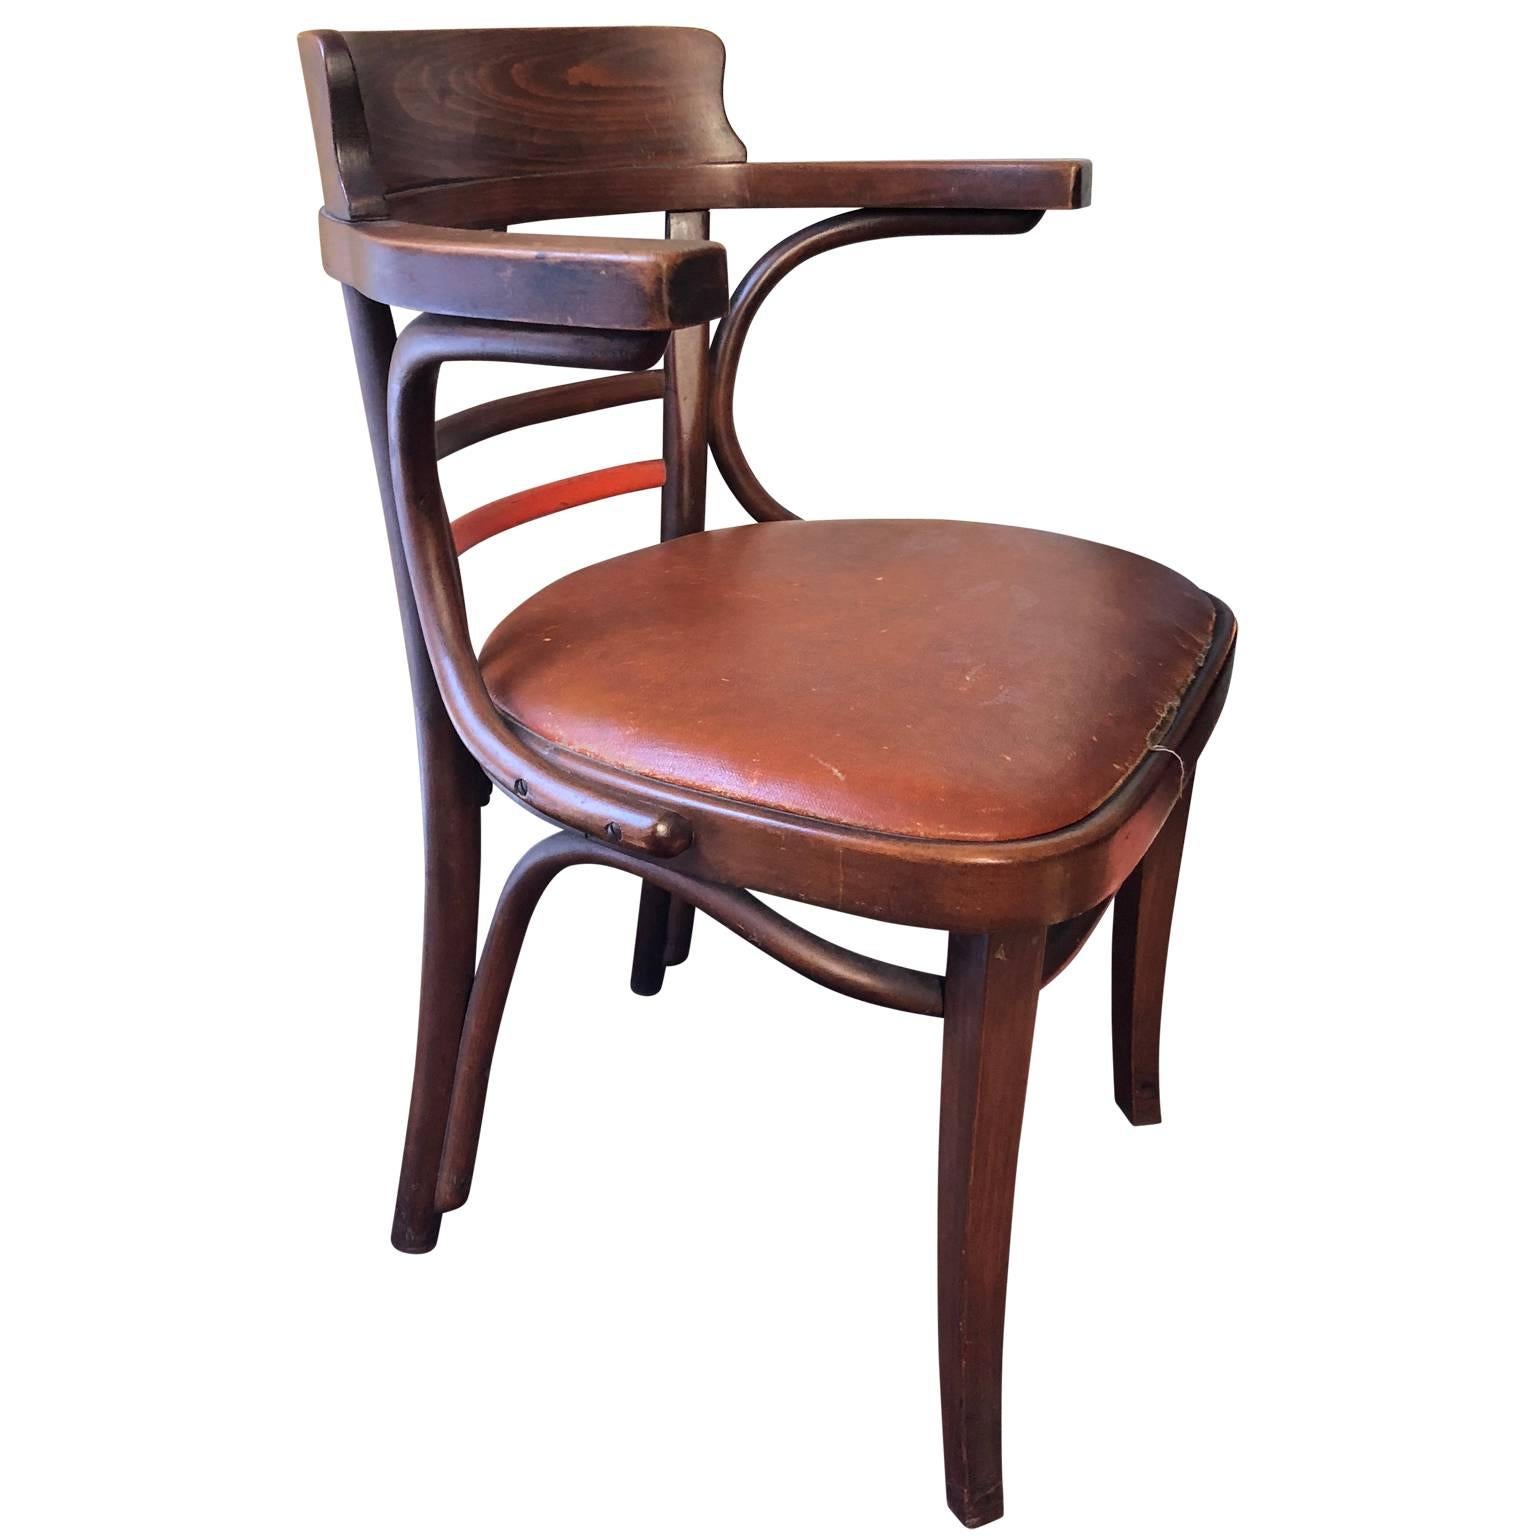 Lacquered Early Thonet Style Bentwood Desk Chair by Jacob & Josef Kohn Mundus